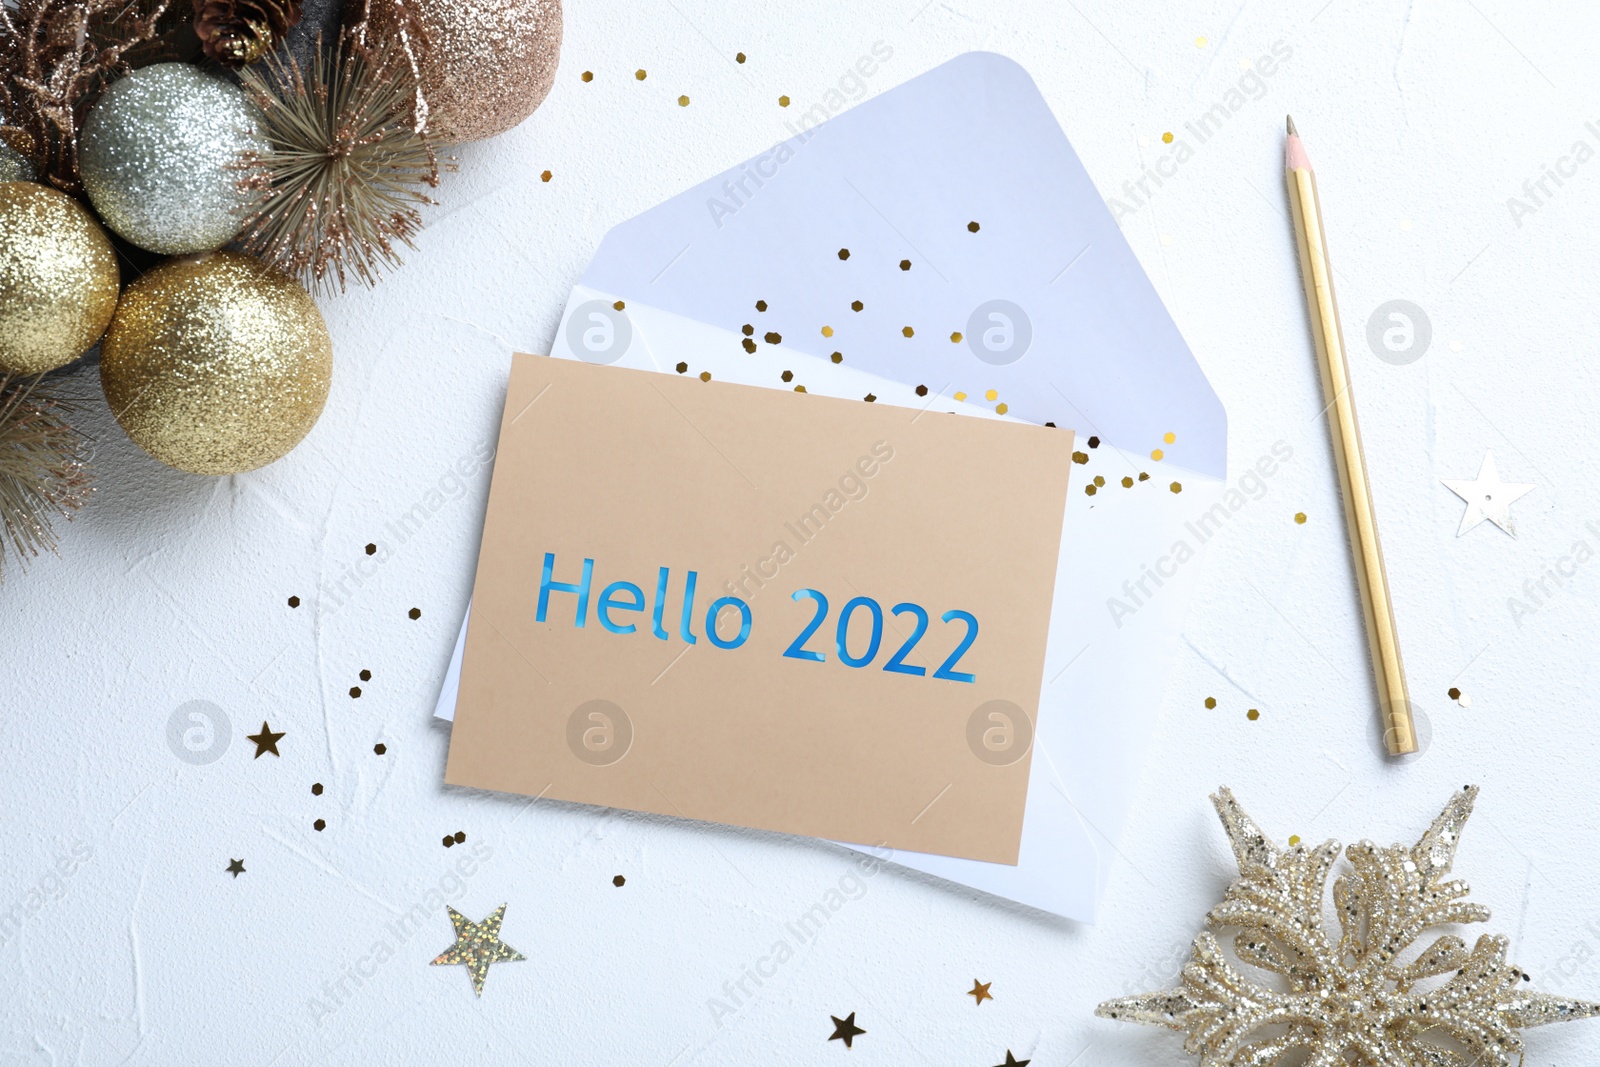 Image of Card with text Hello 2022, envelope and Christmas decor on white background, flat lay